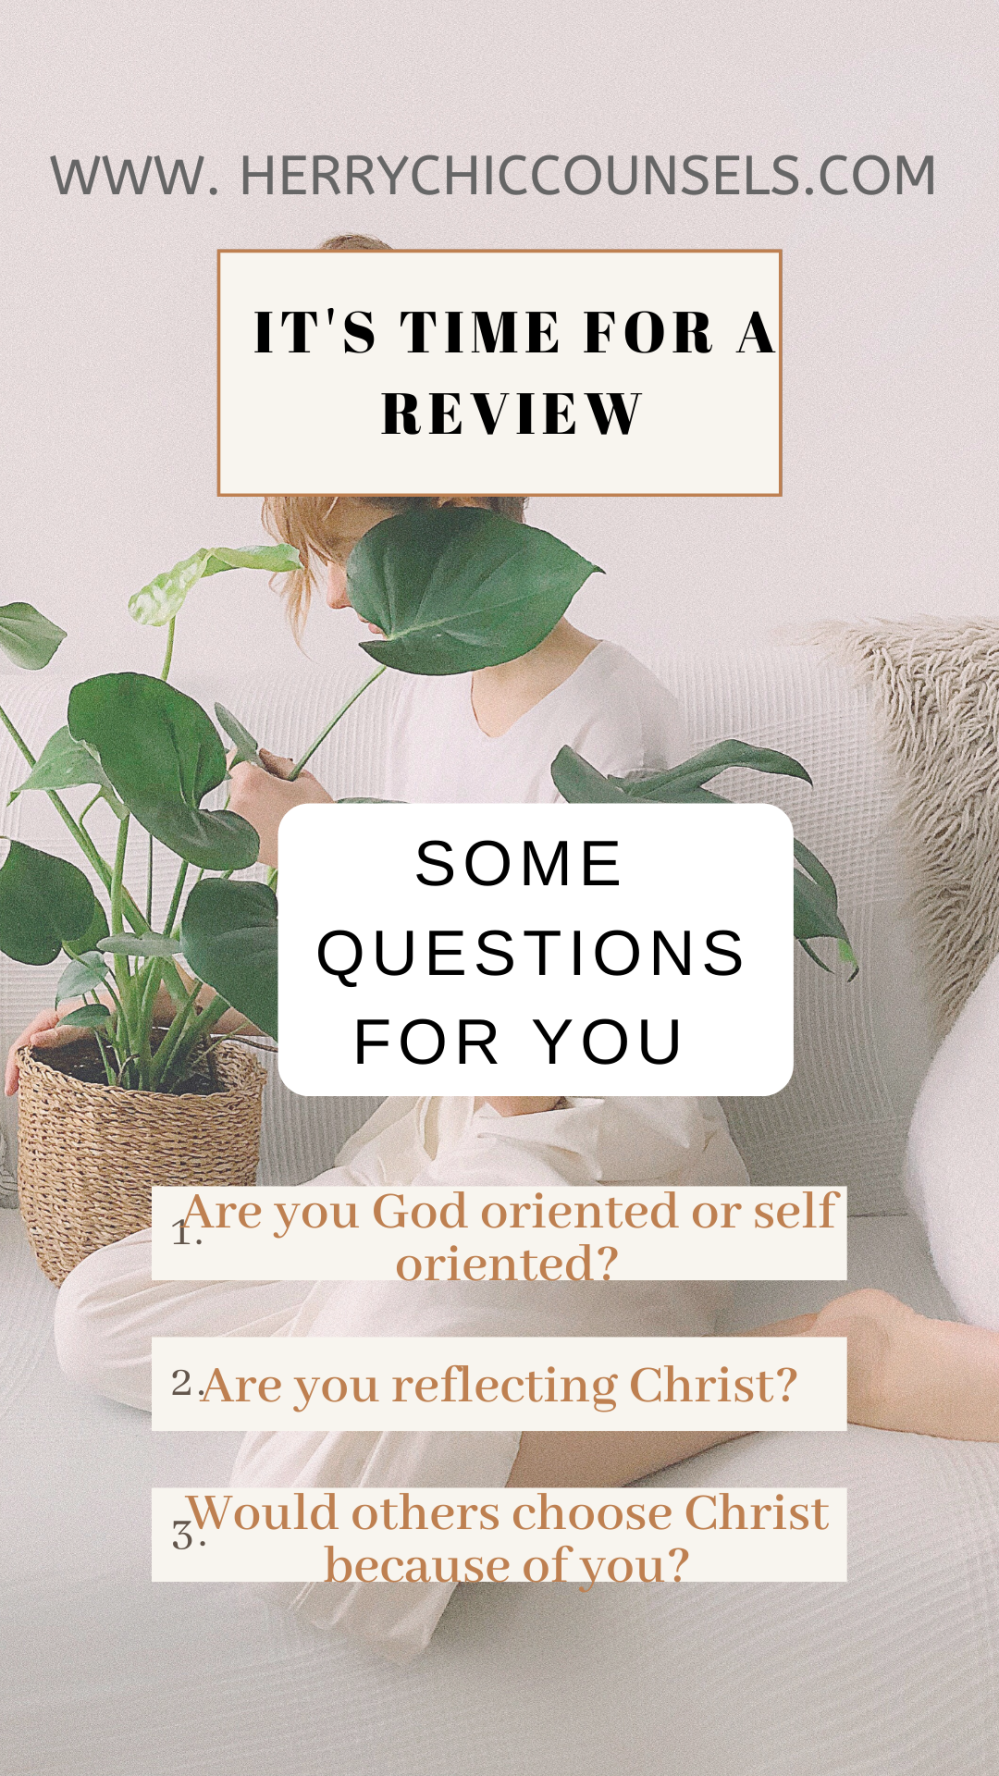 Review - questions - God oriented